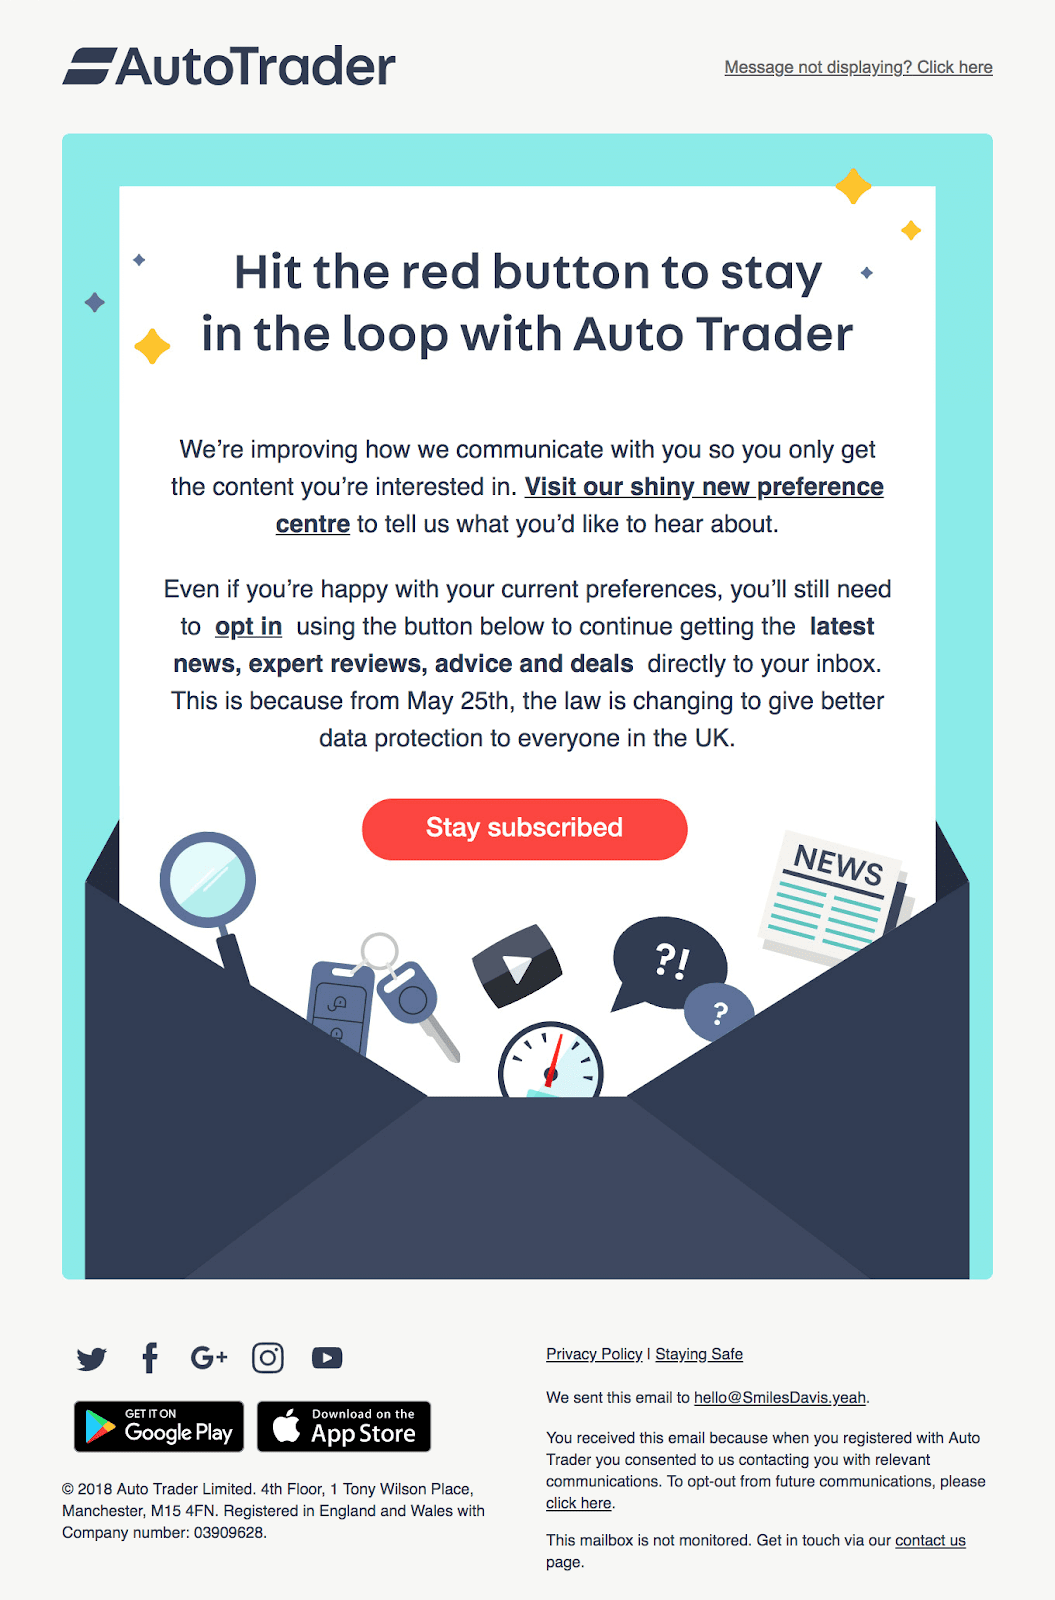 See how AutoTrader is upfront about updating subscriber permissions in this email